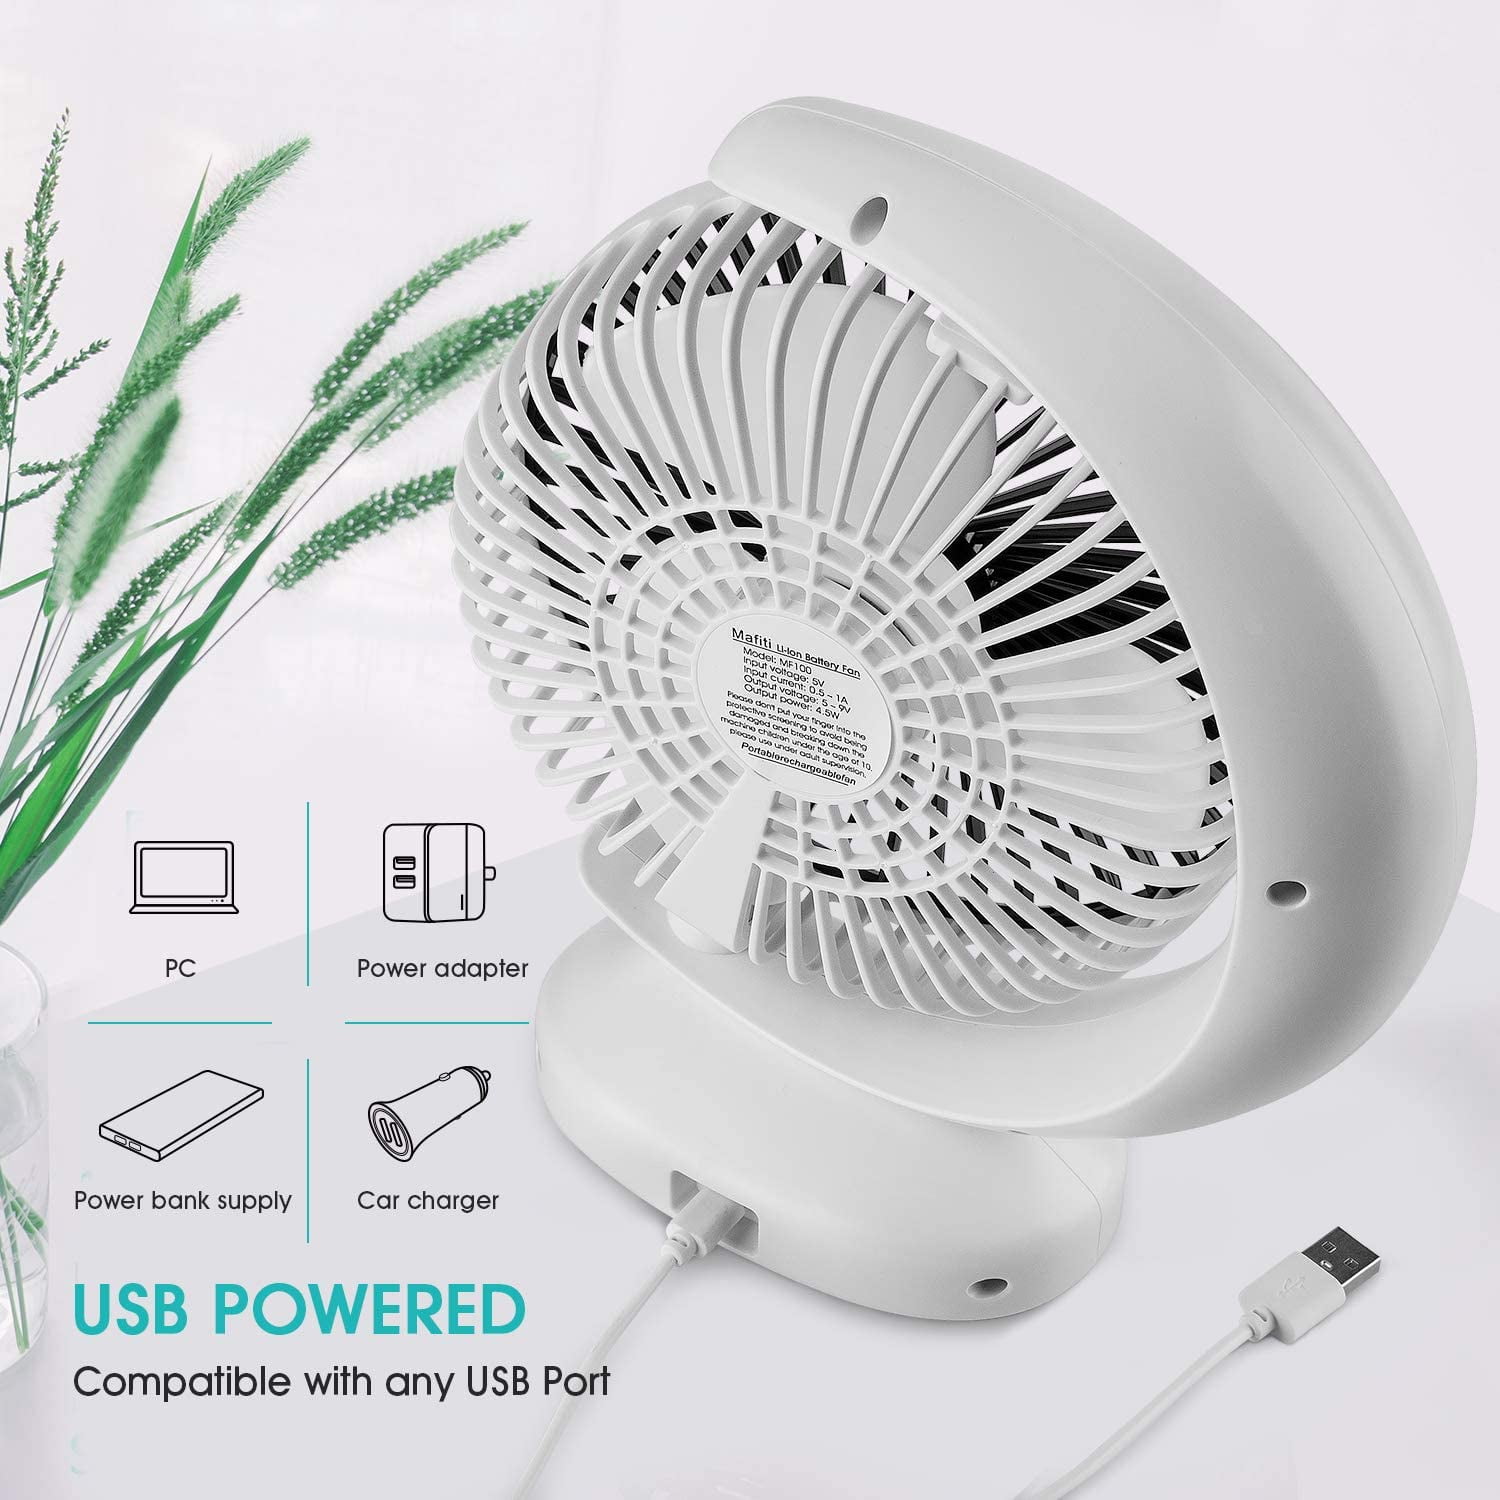 USB Desk Fans 2400mah Battery Rechargeable Table Fan for Bedside Tables Office Home Use 3 Speed mafiti 8-inch Quiet Fans for Bedroom Black 